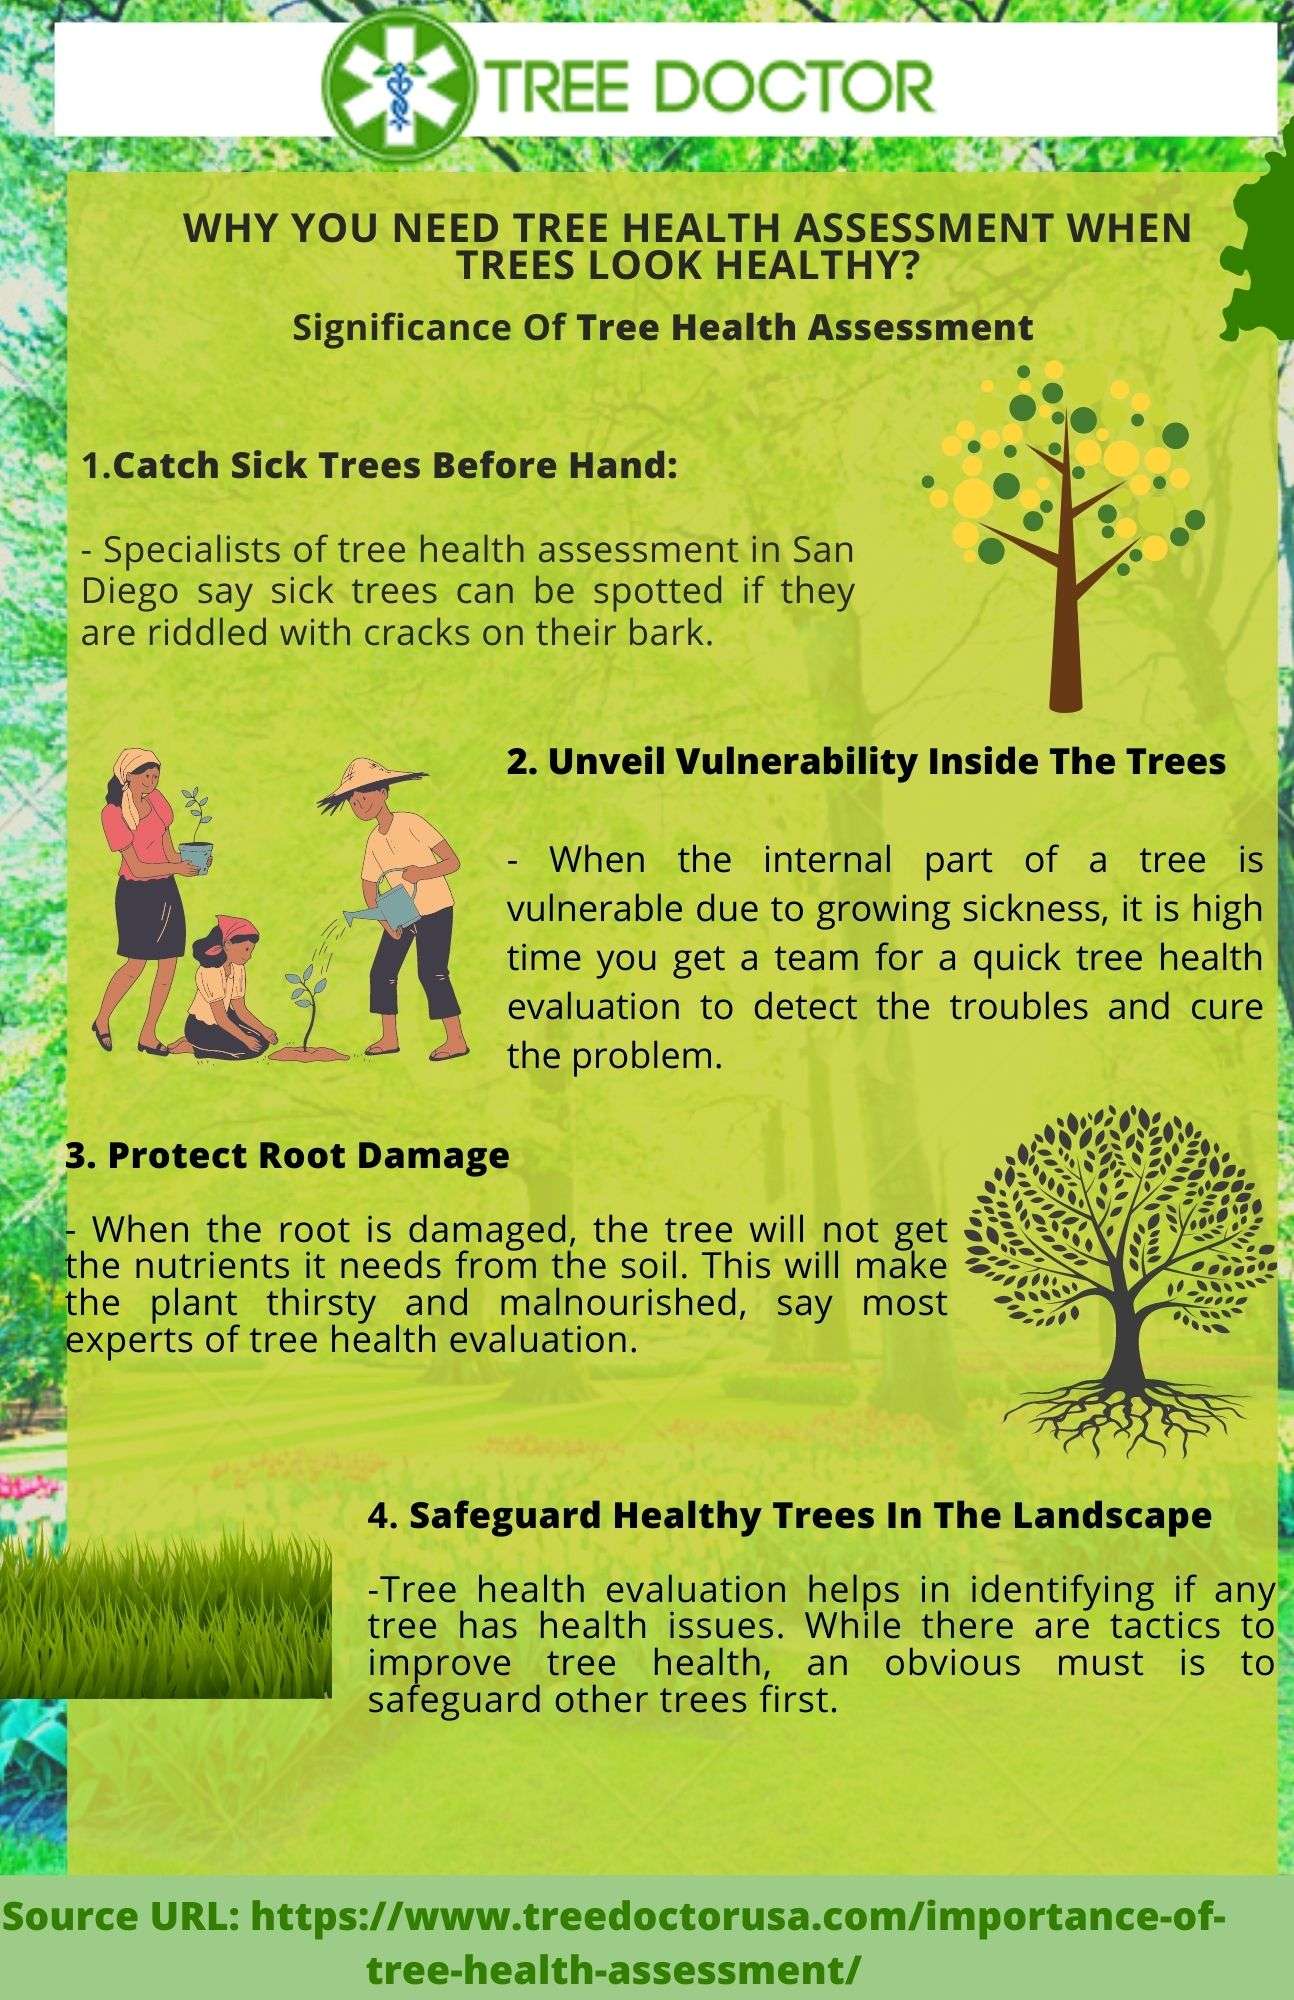 Significance Of Tree Health Assessment When Your Trees Look Healthy width=